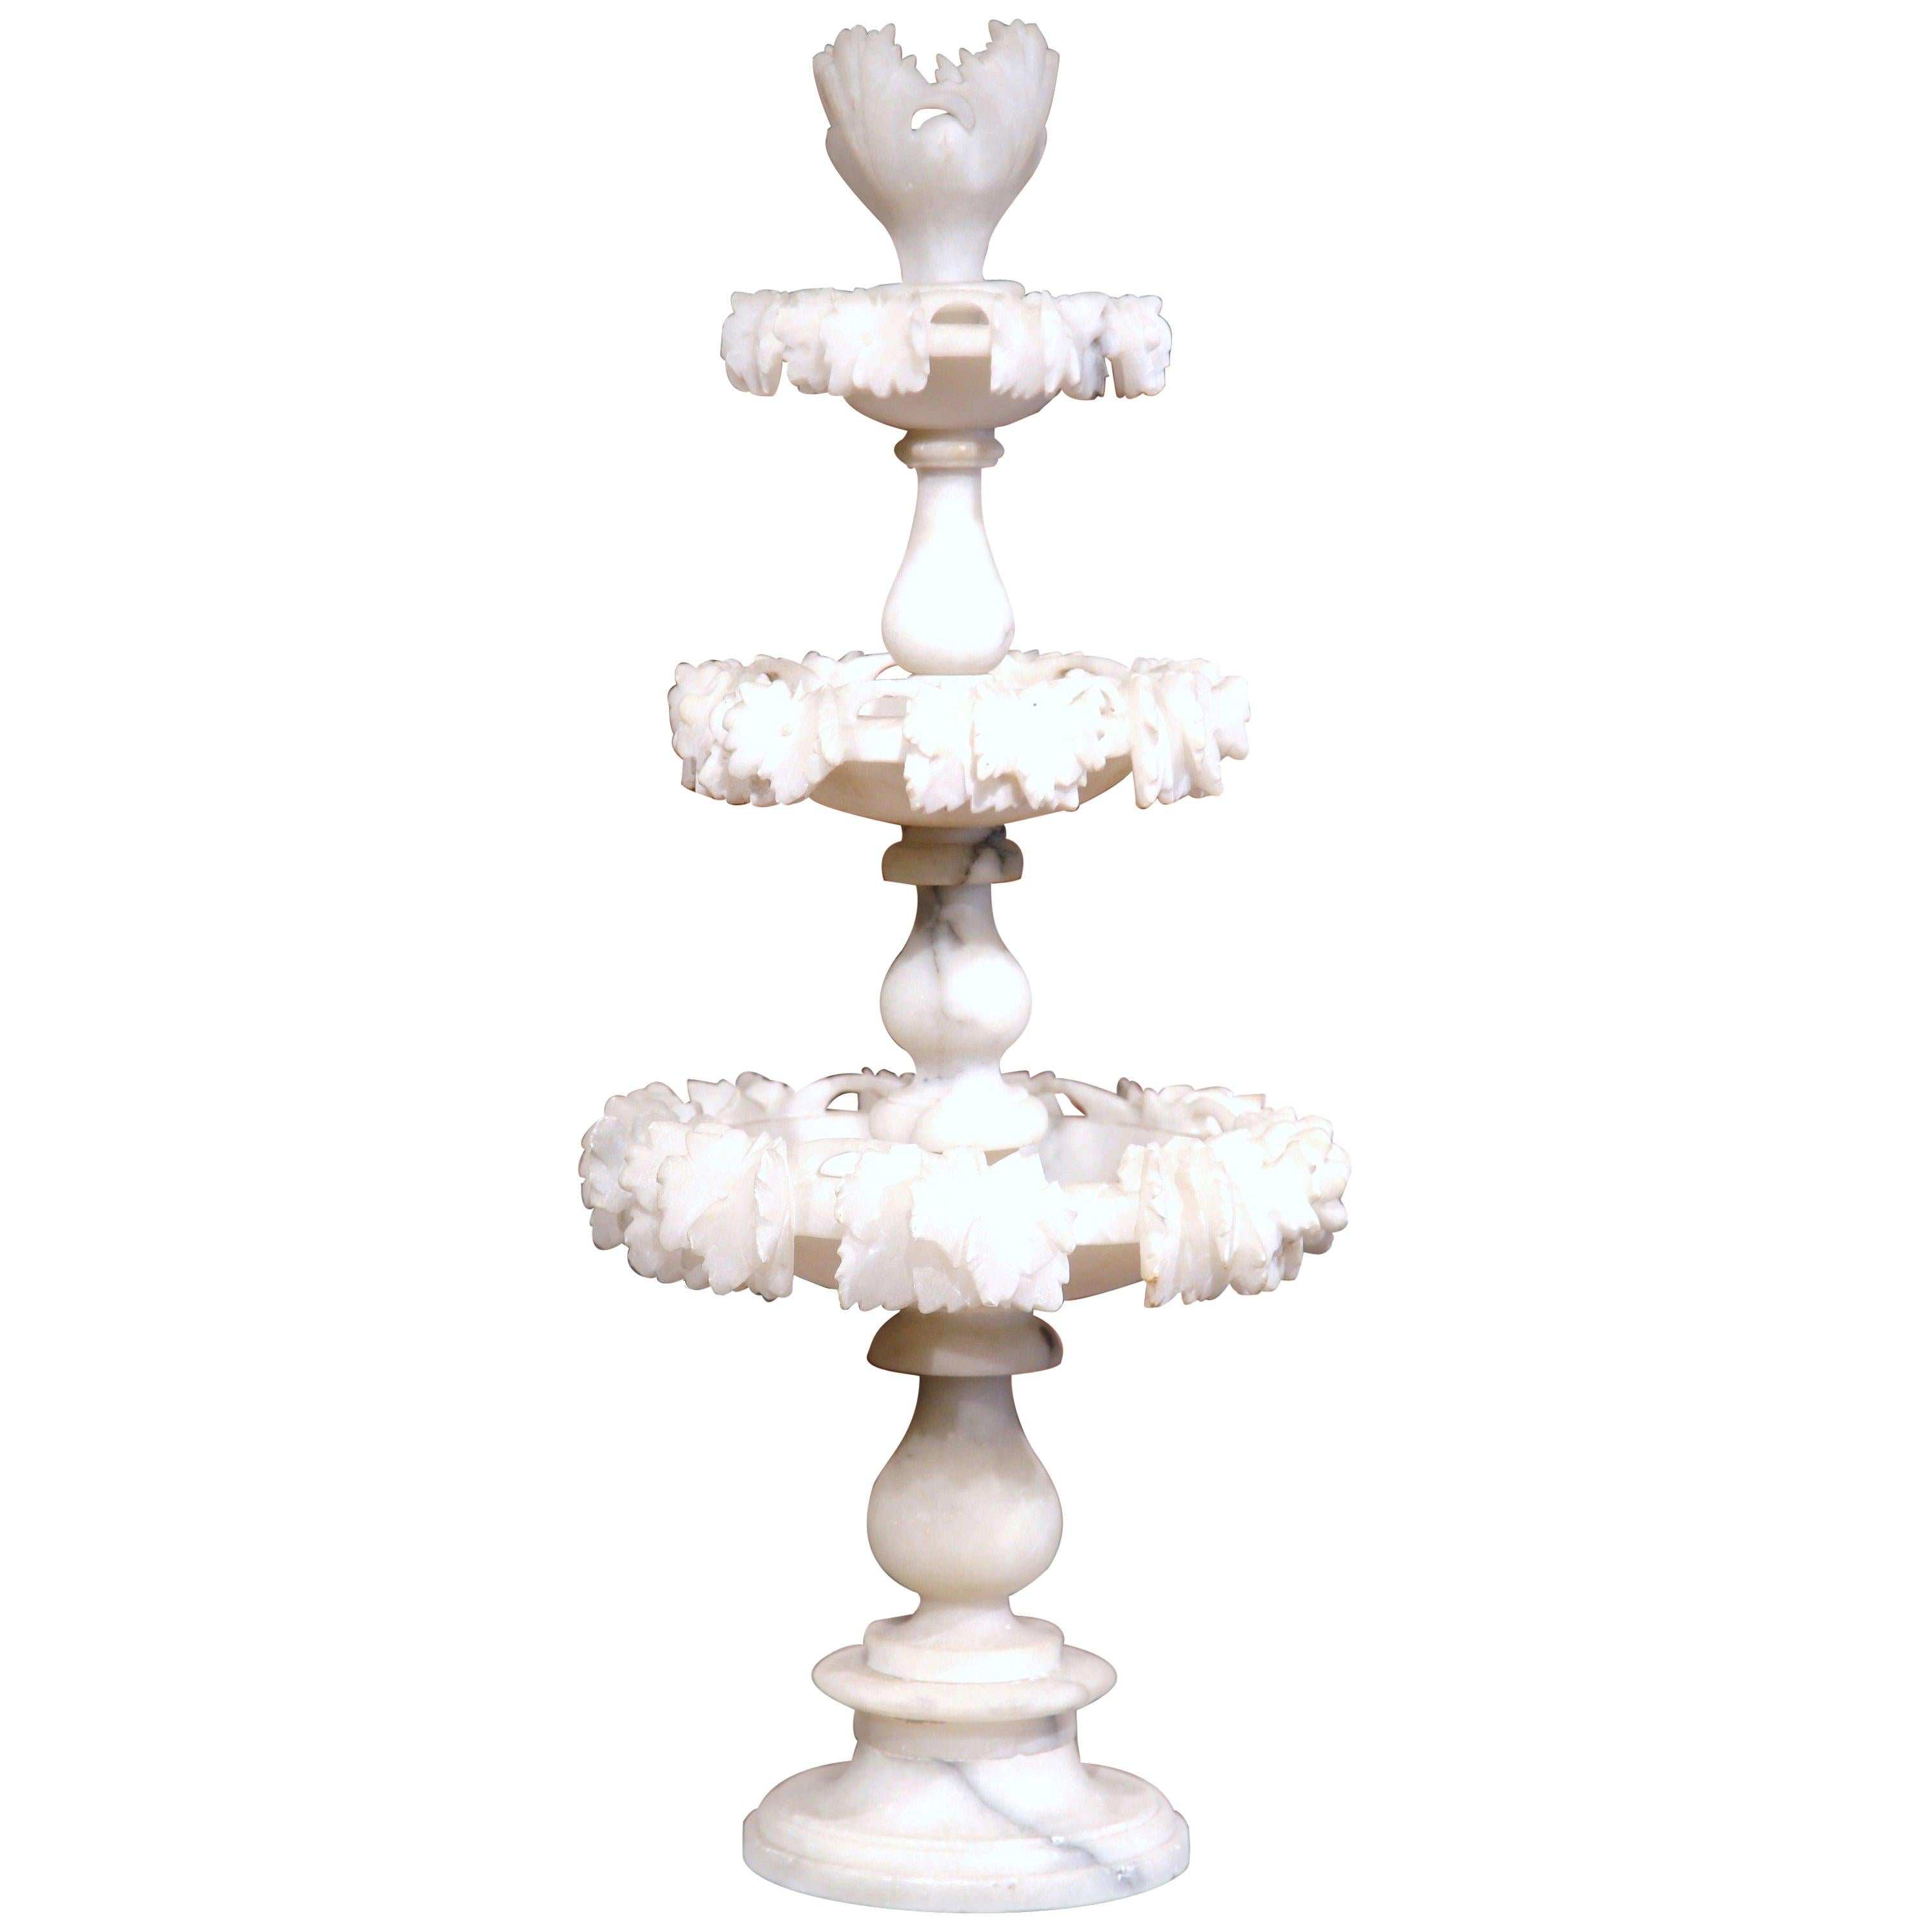 19th Century French Carved Three-Tier Alabaster Display Centerpiece